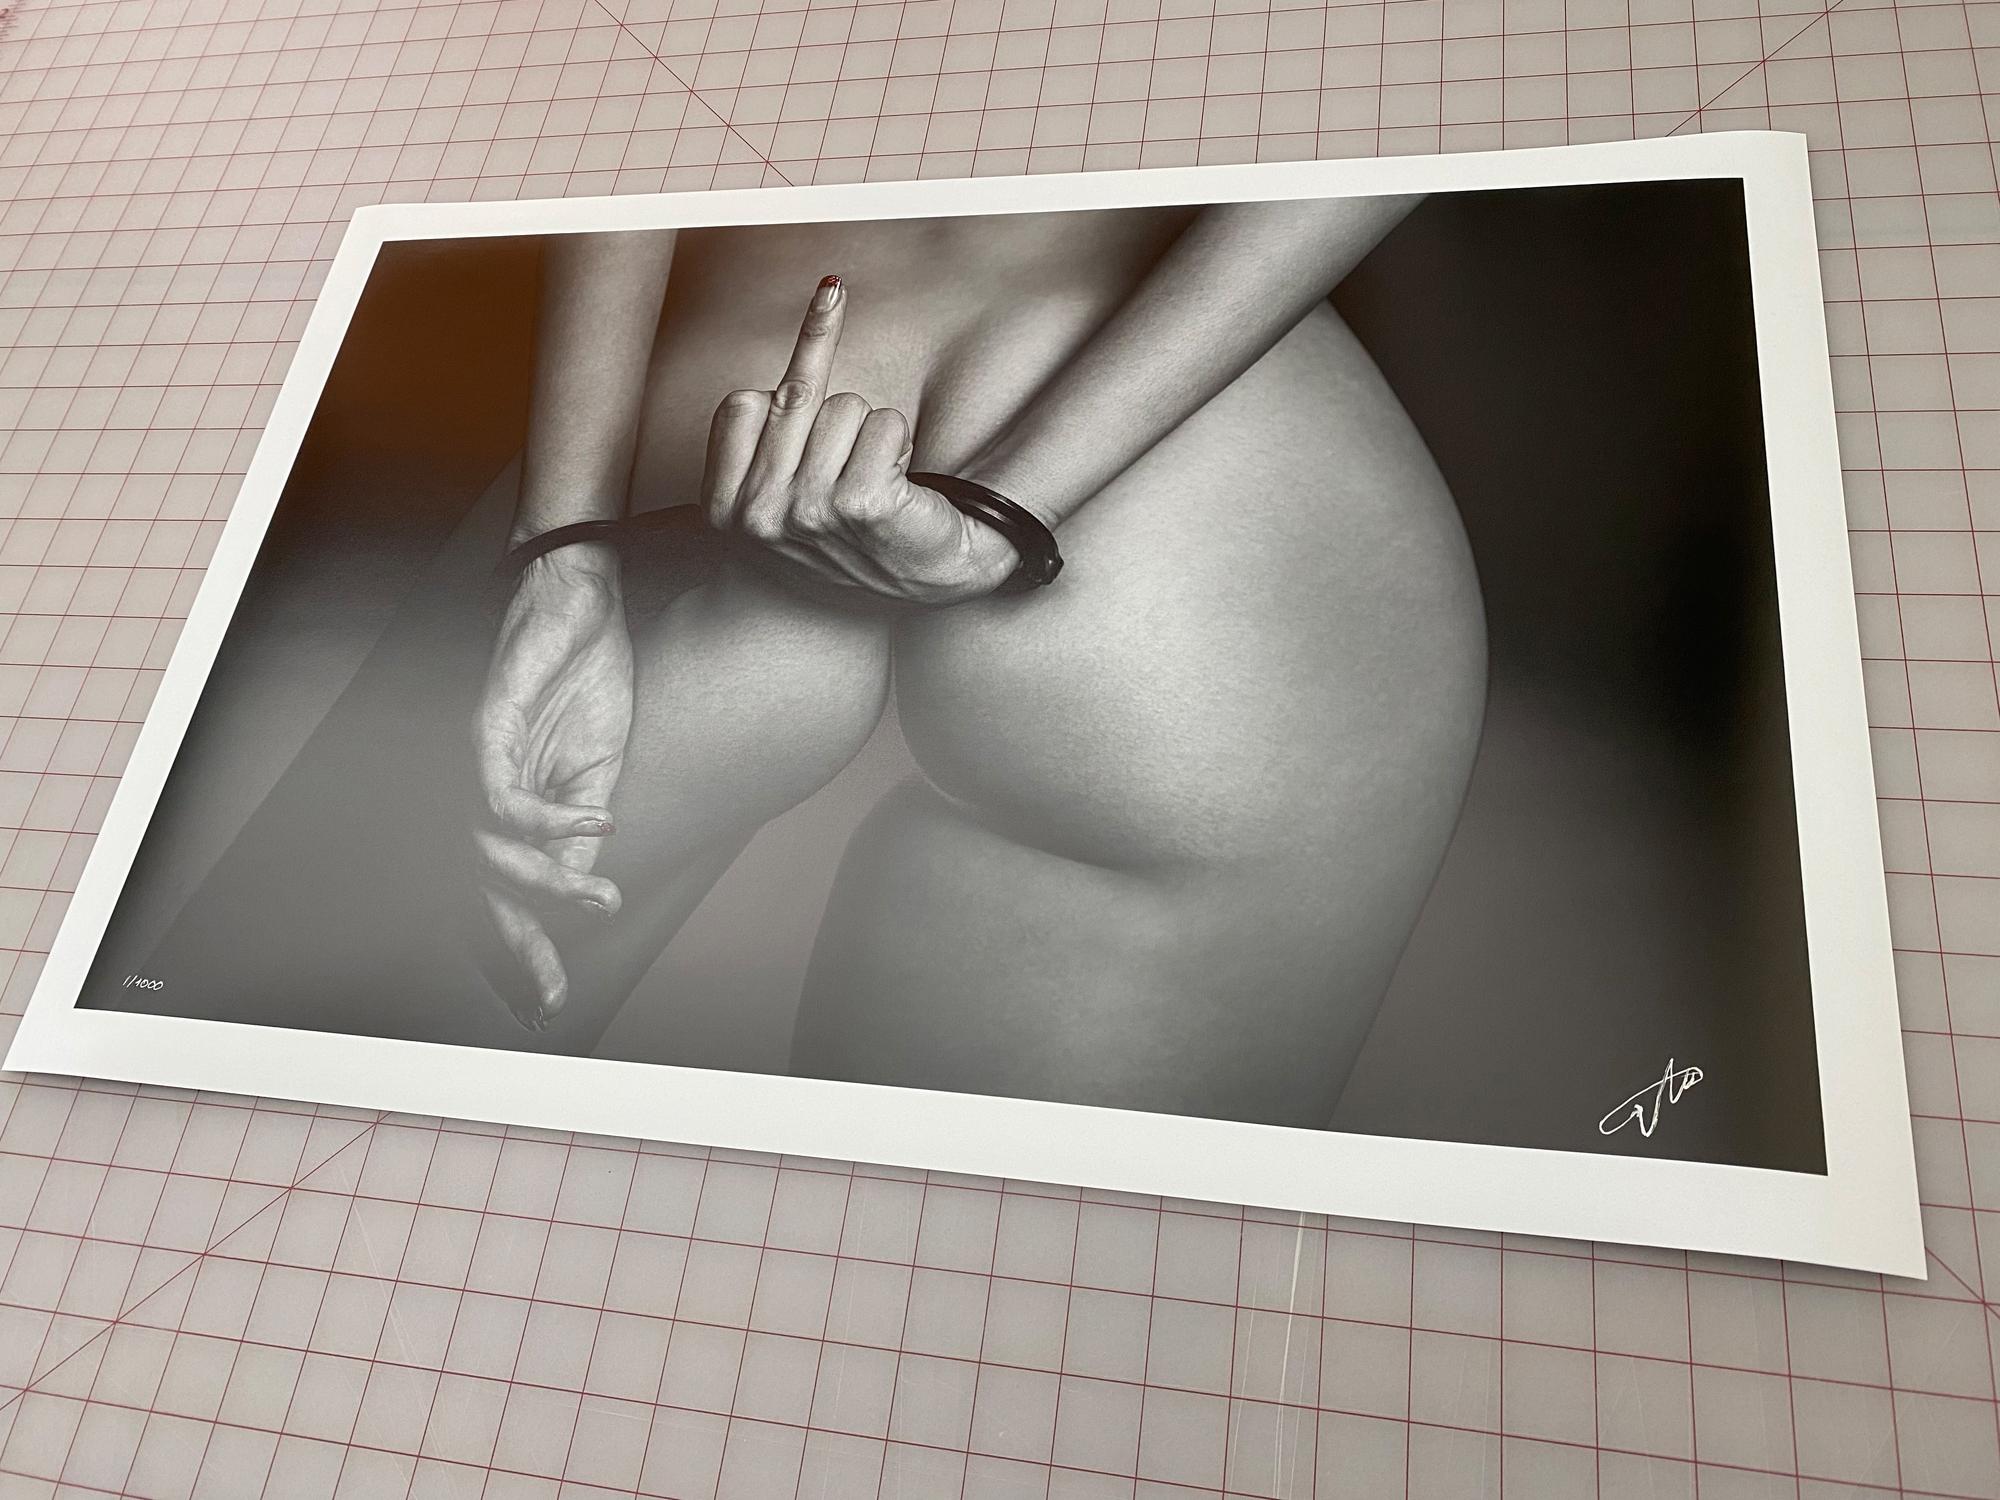 No Way - black & white nude photograph - print on paper 18